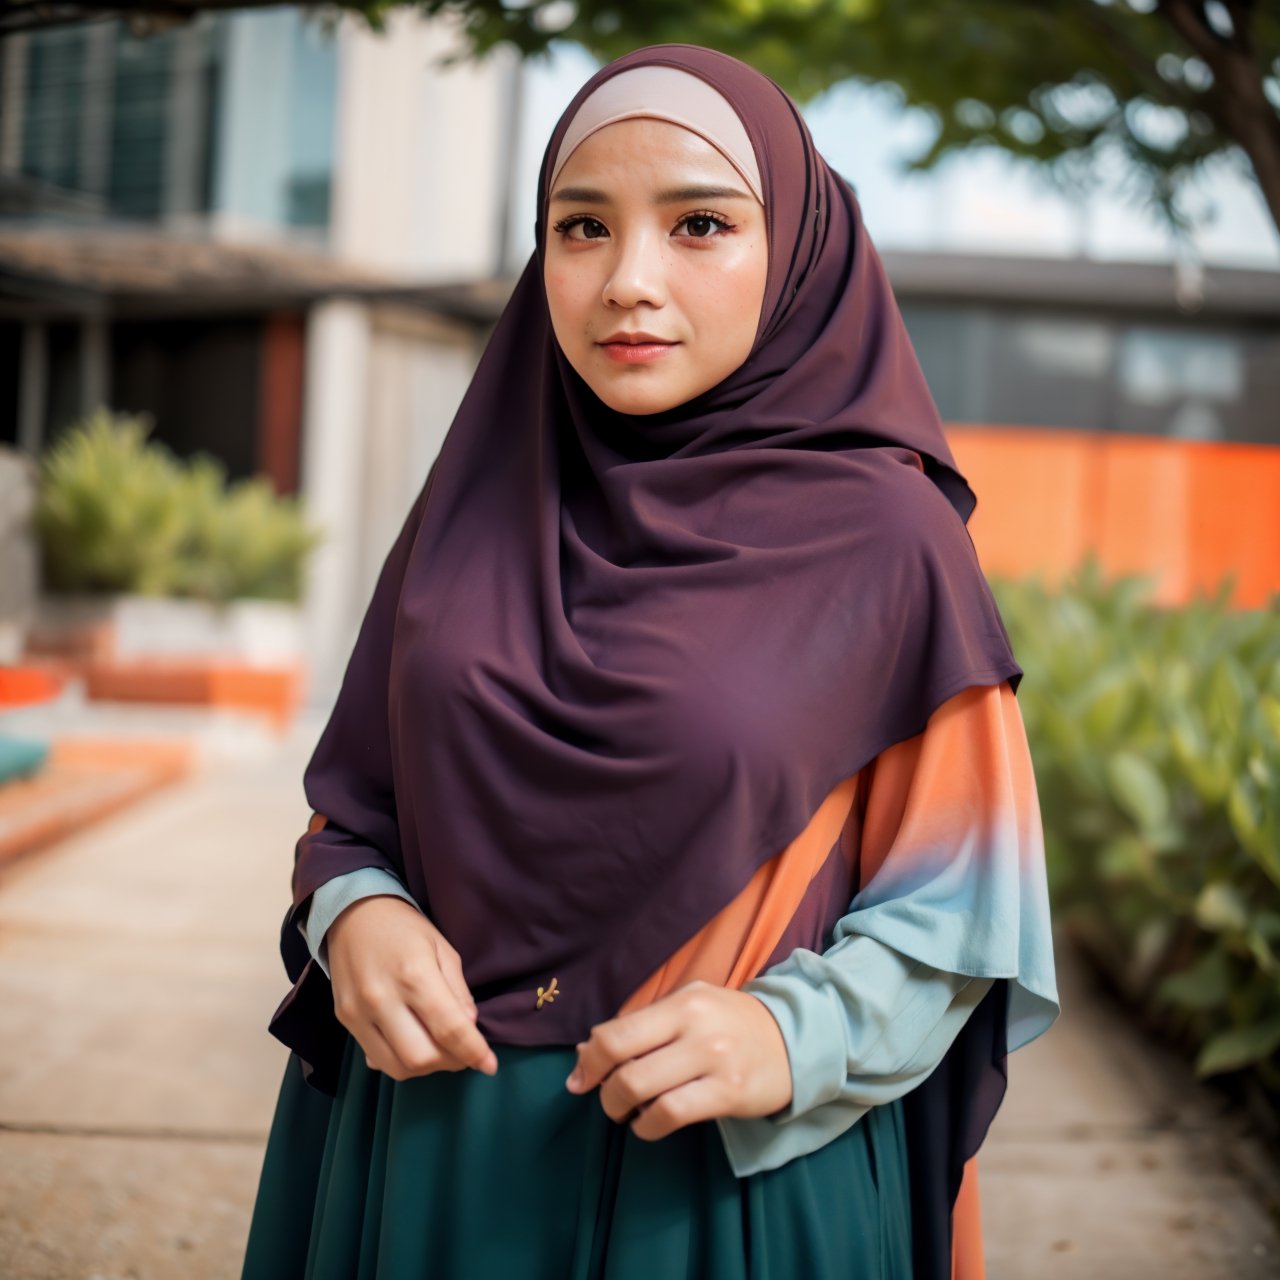 lady, 25 years old, hijab, modest, graceful, delicate face, perfect, royal, random color dress, random aesthetic outdoor background, loose clothes,exposure blend, cowboy shot, bokeh, (hdr:1.4), high contrast, (cinematic, teal and orange:0.85), (muted colors, dim colors, soothing tones:1.3), low saturation, dramatic pose, upper body, mature face,gamis, smile, aesthetic,perfecteyes,n4git4